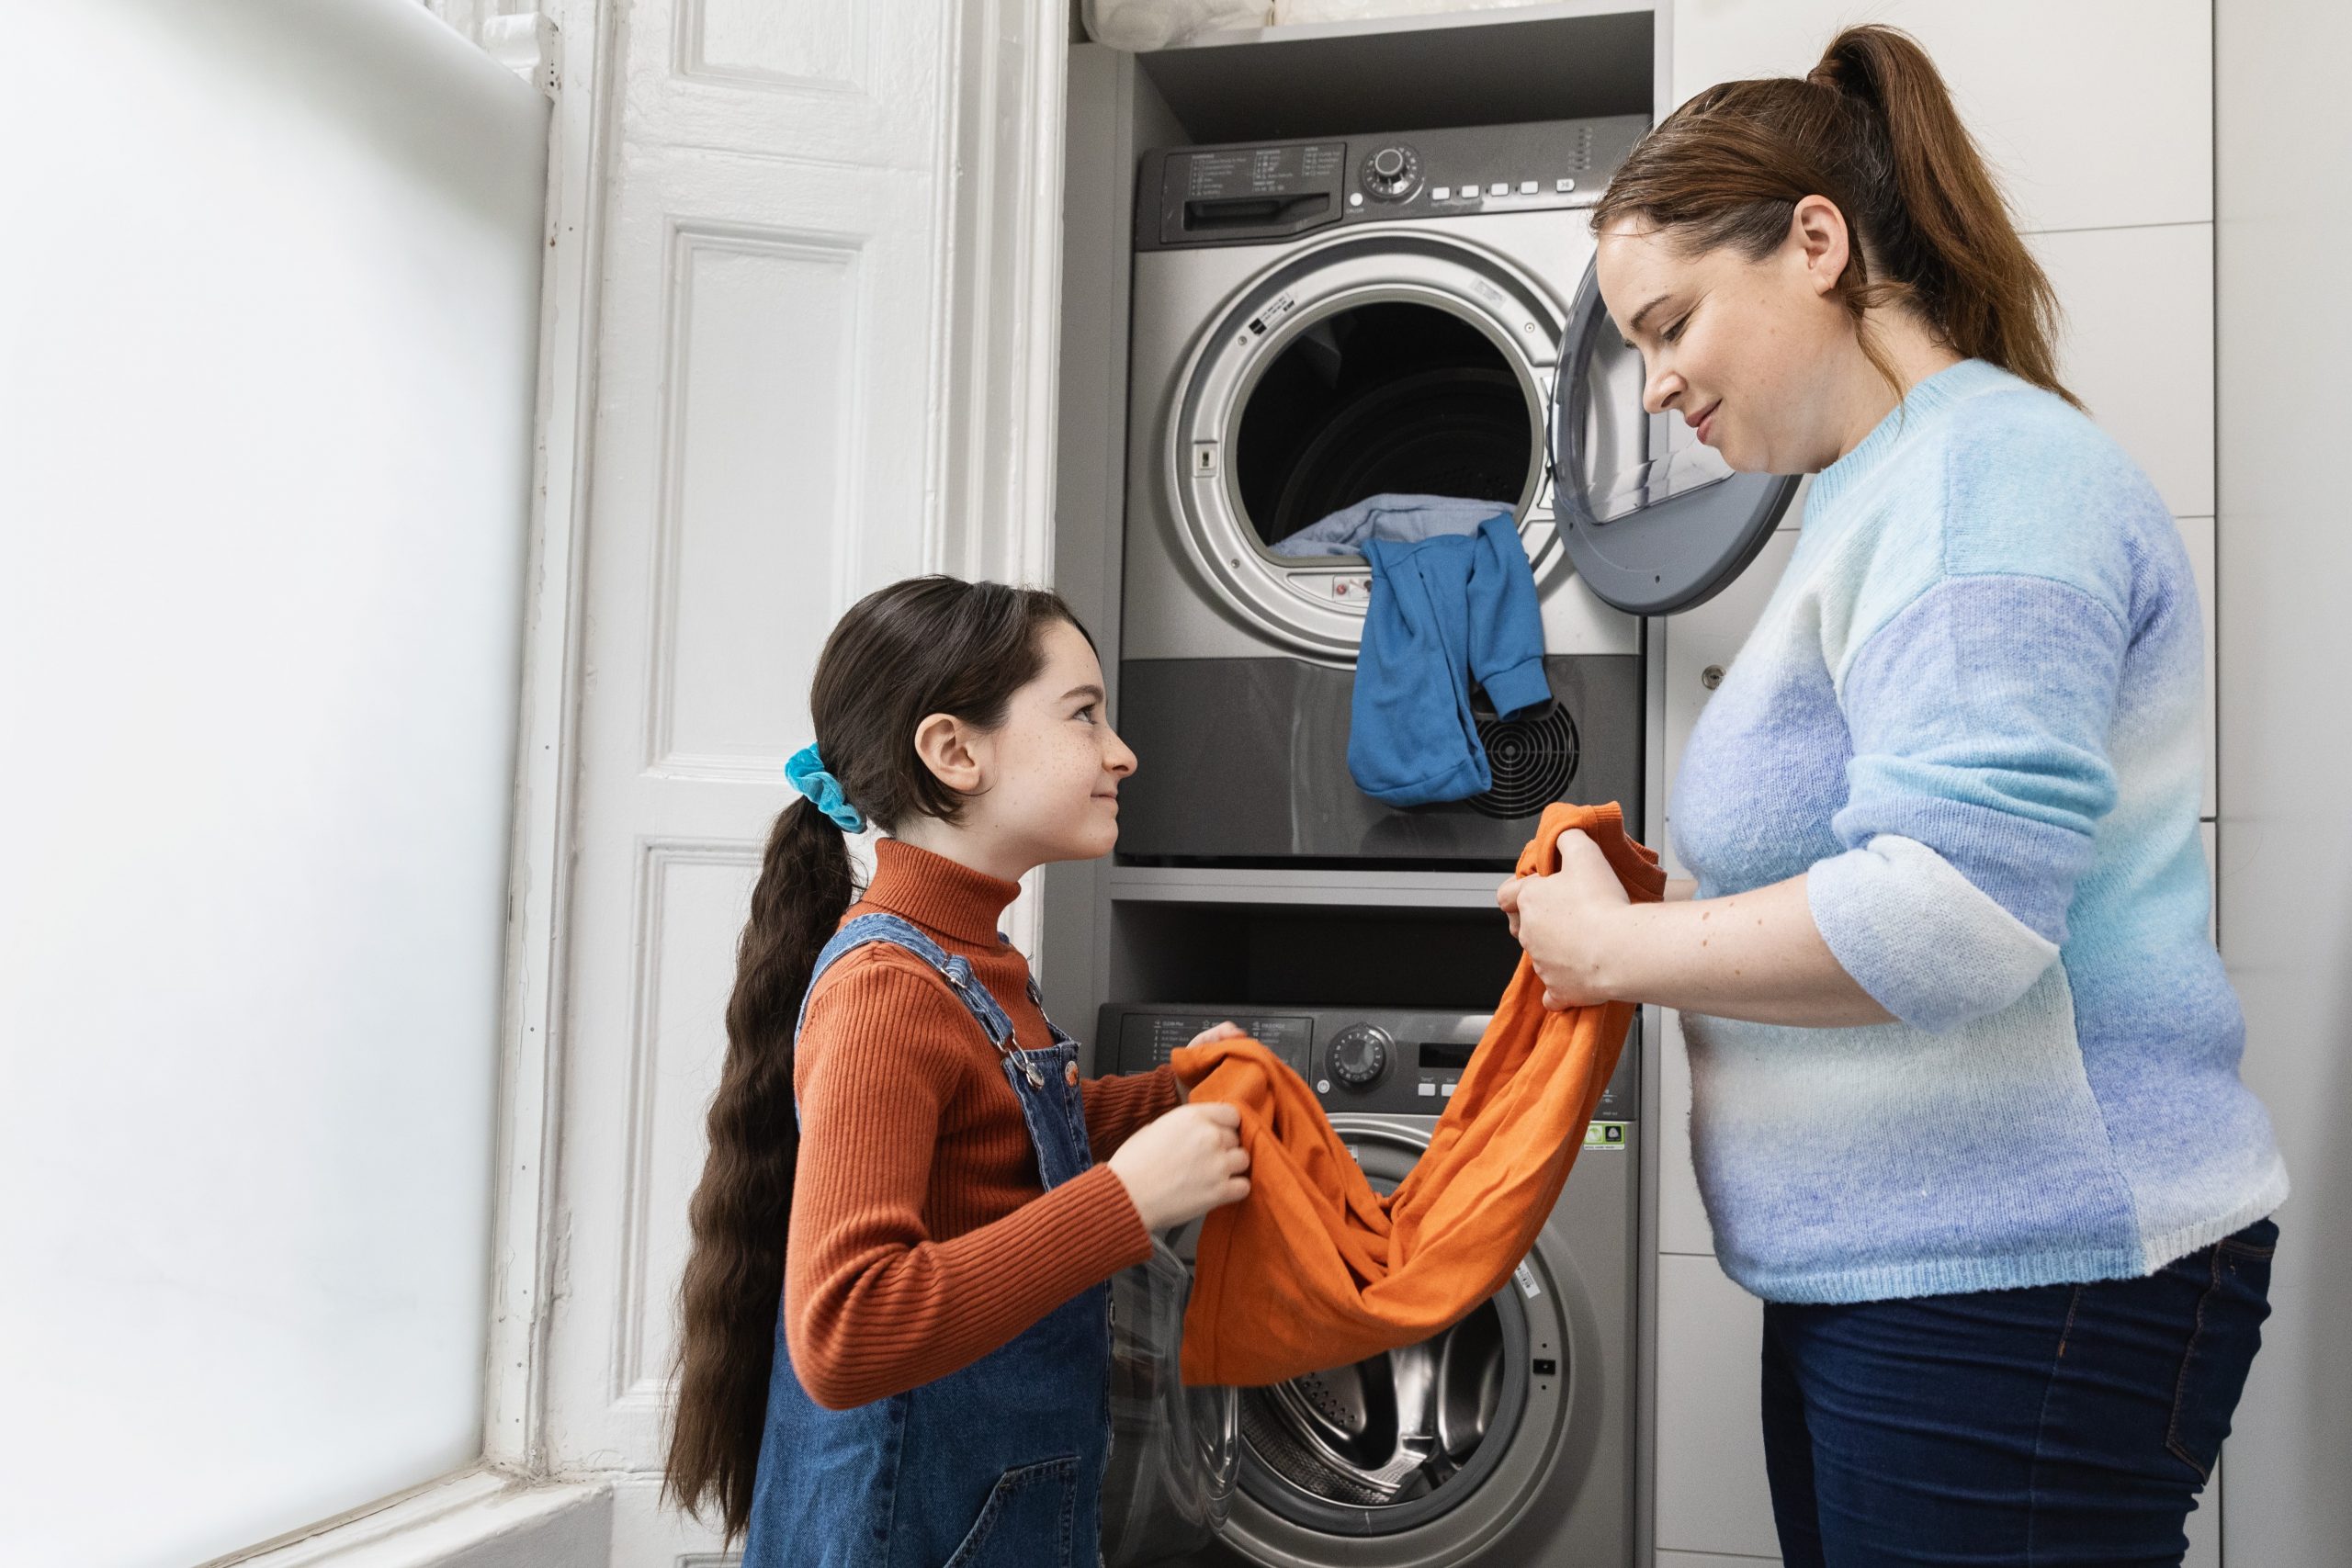 A mother and daughter help each other fold laundry.